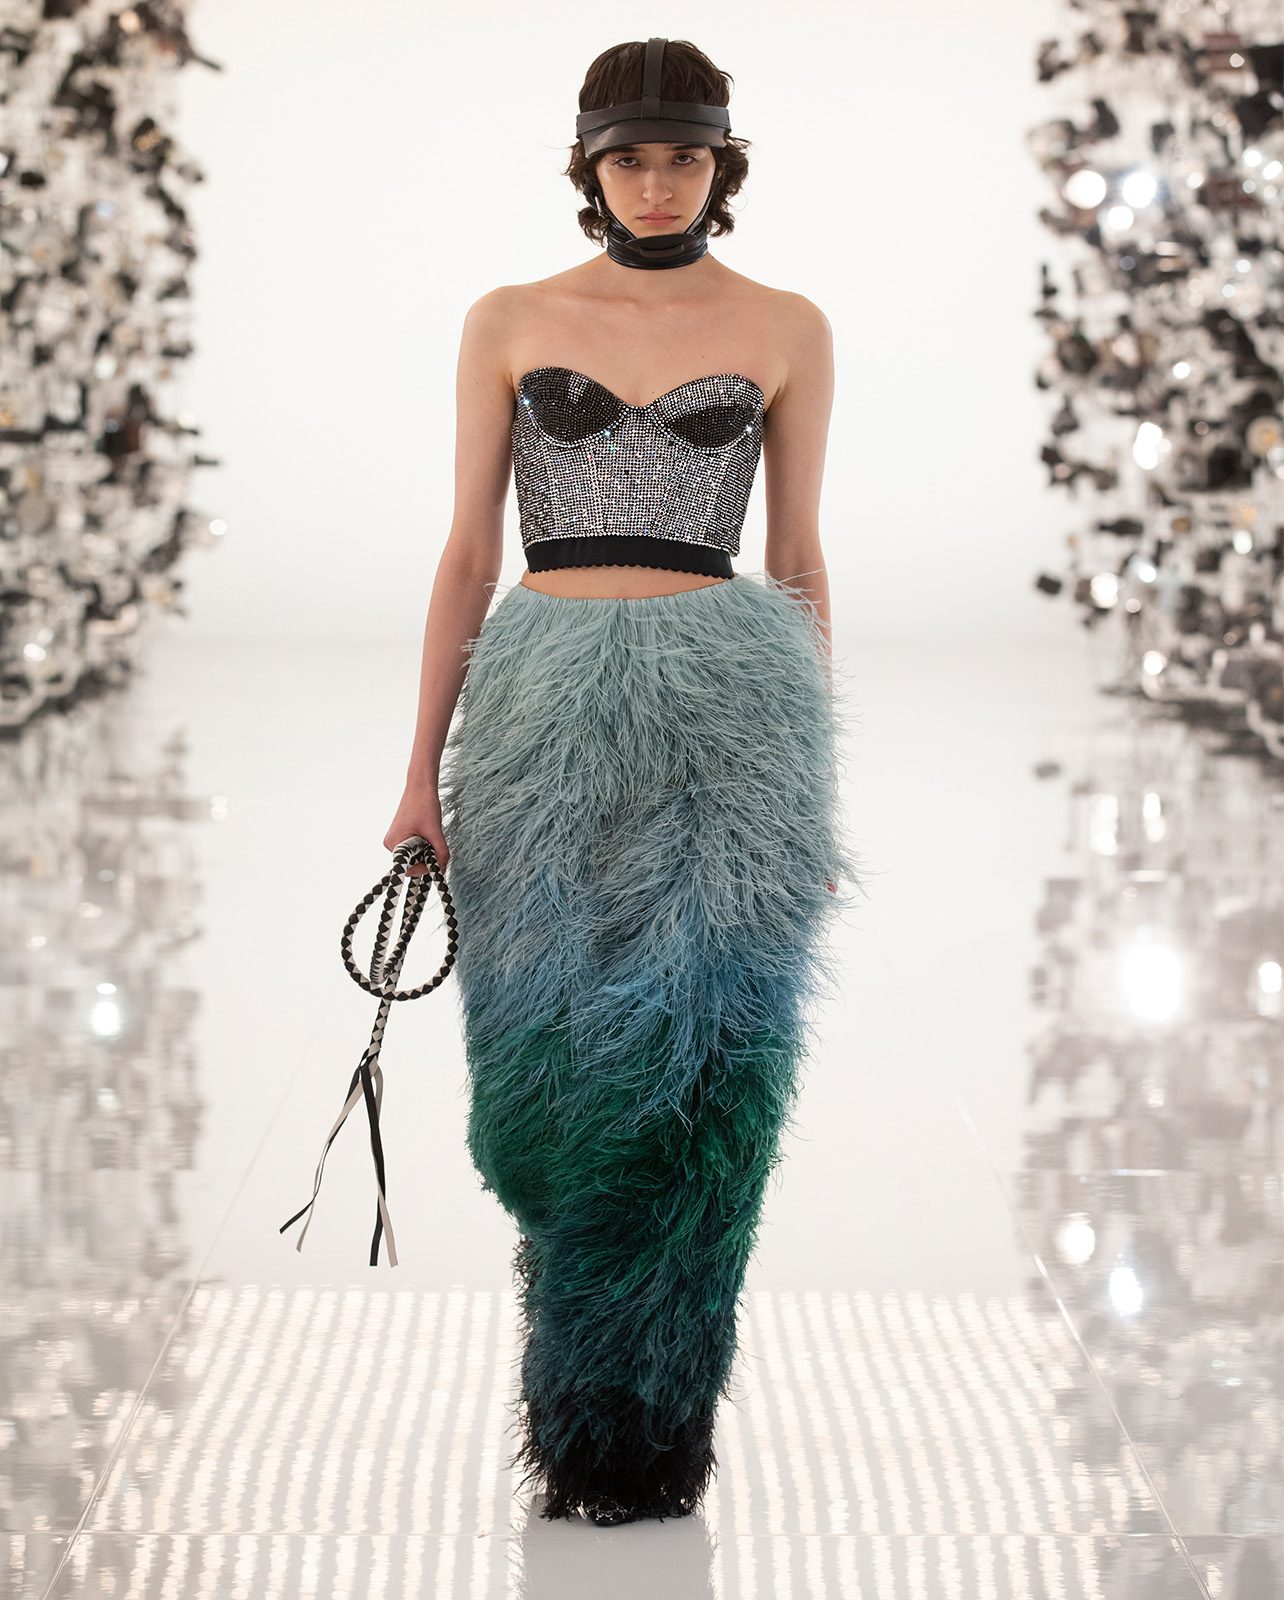 Woman walking on a runway in an embellished bustier crop top and a blue feathered skirt